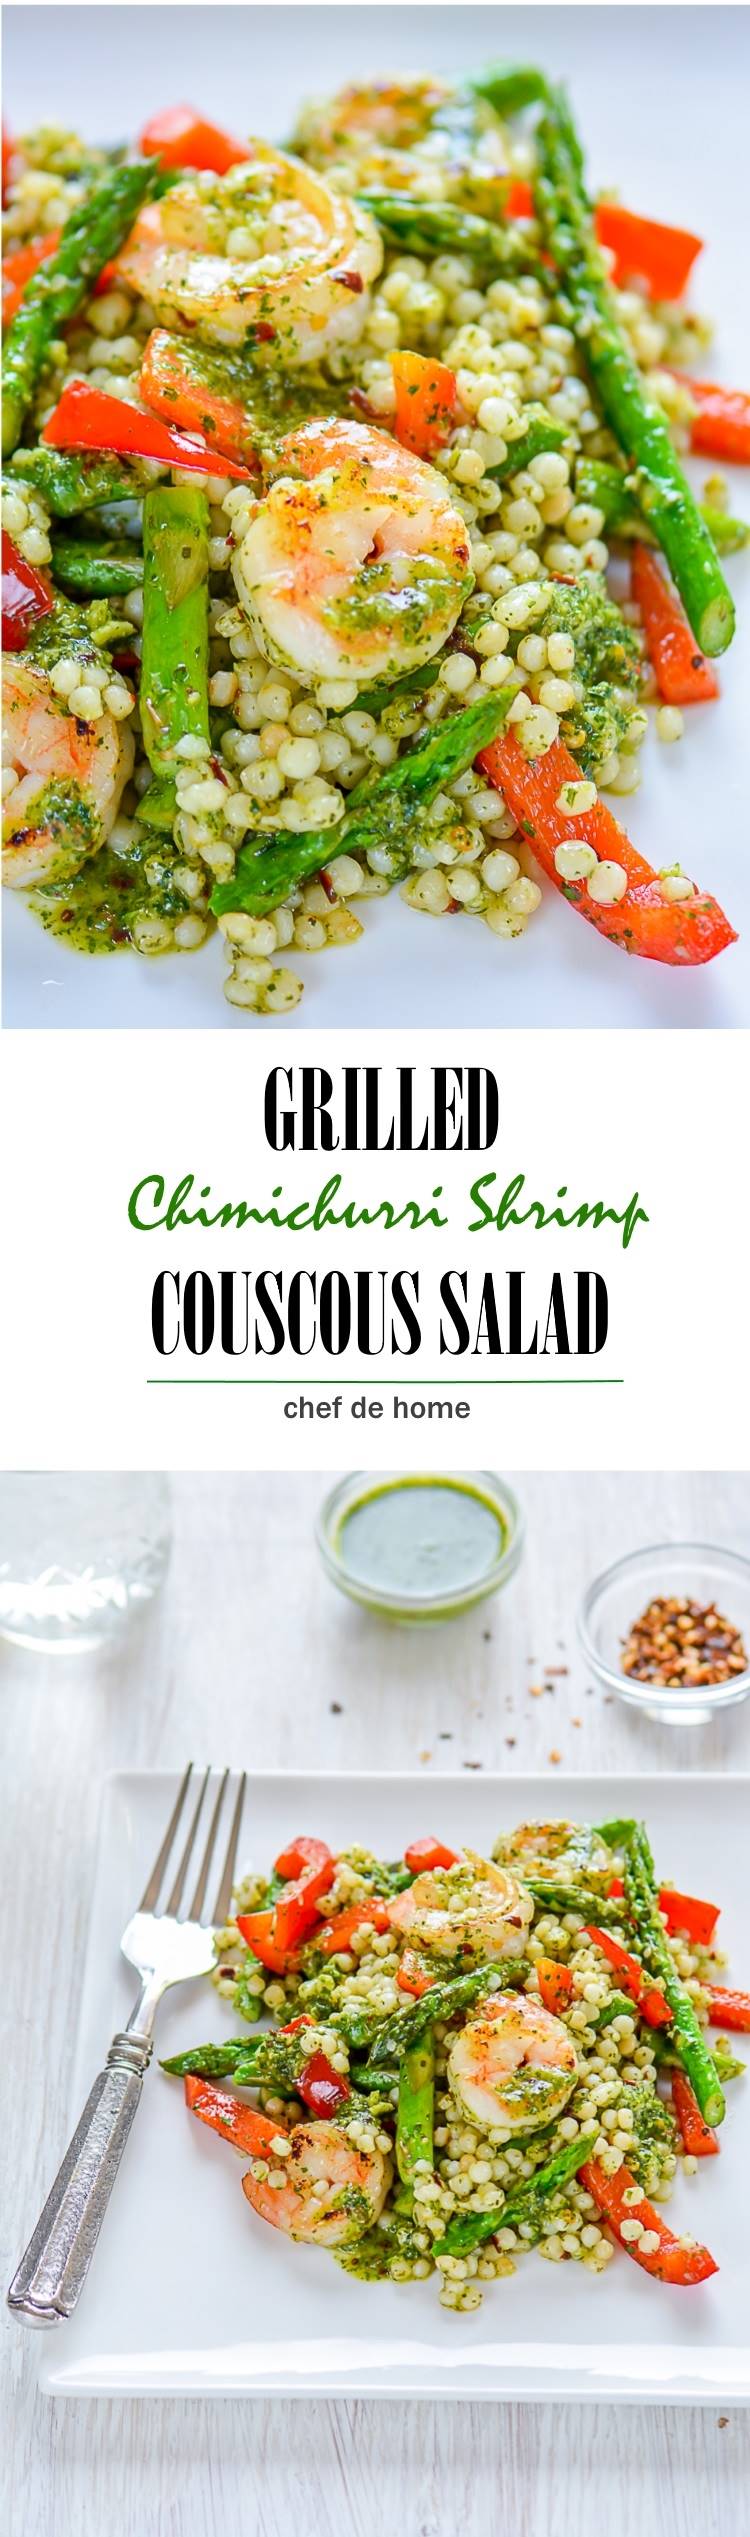 A lite dinner or delicious potluck salad loaded with lean grilled chimichurri shrimp and couscous pasta salad | chefdehome.com